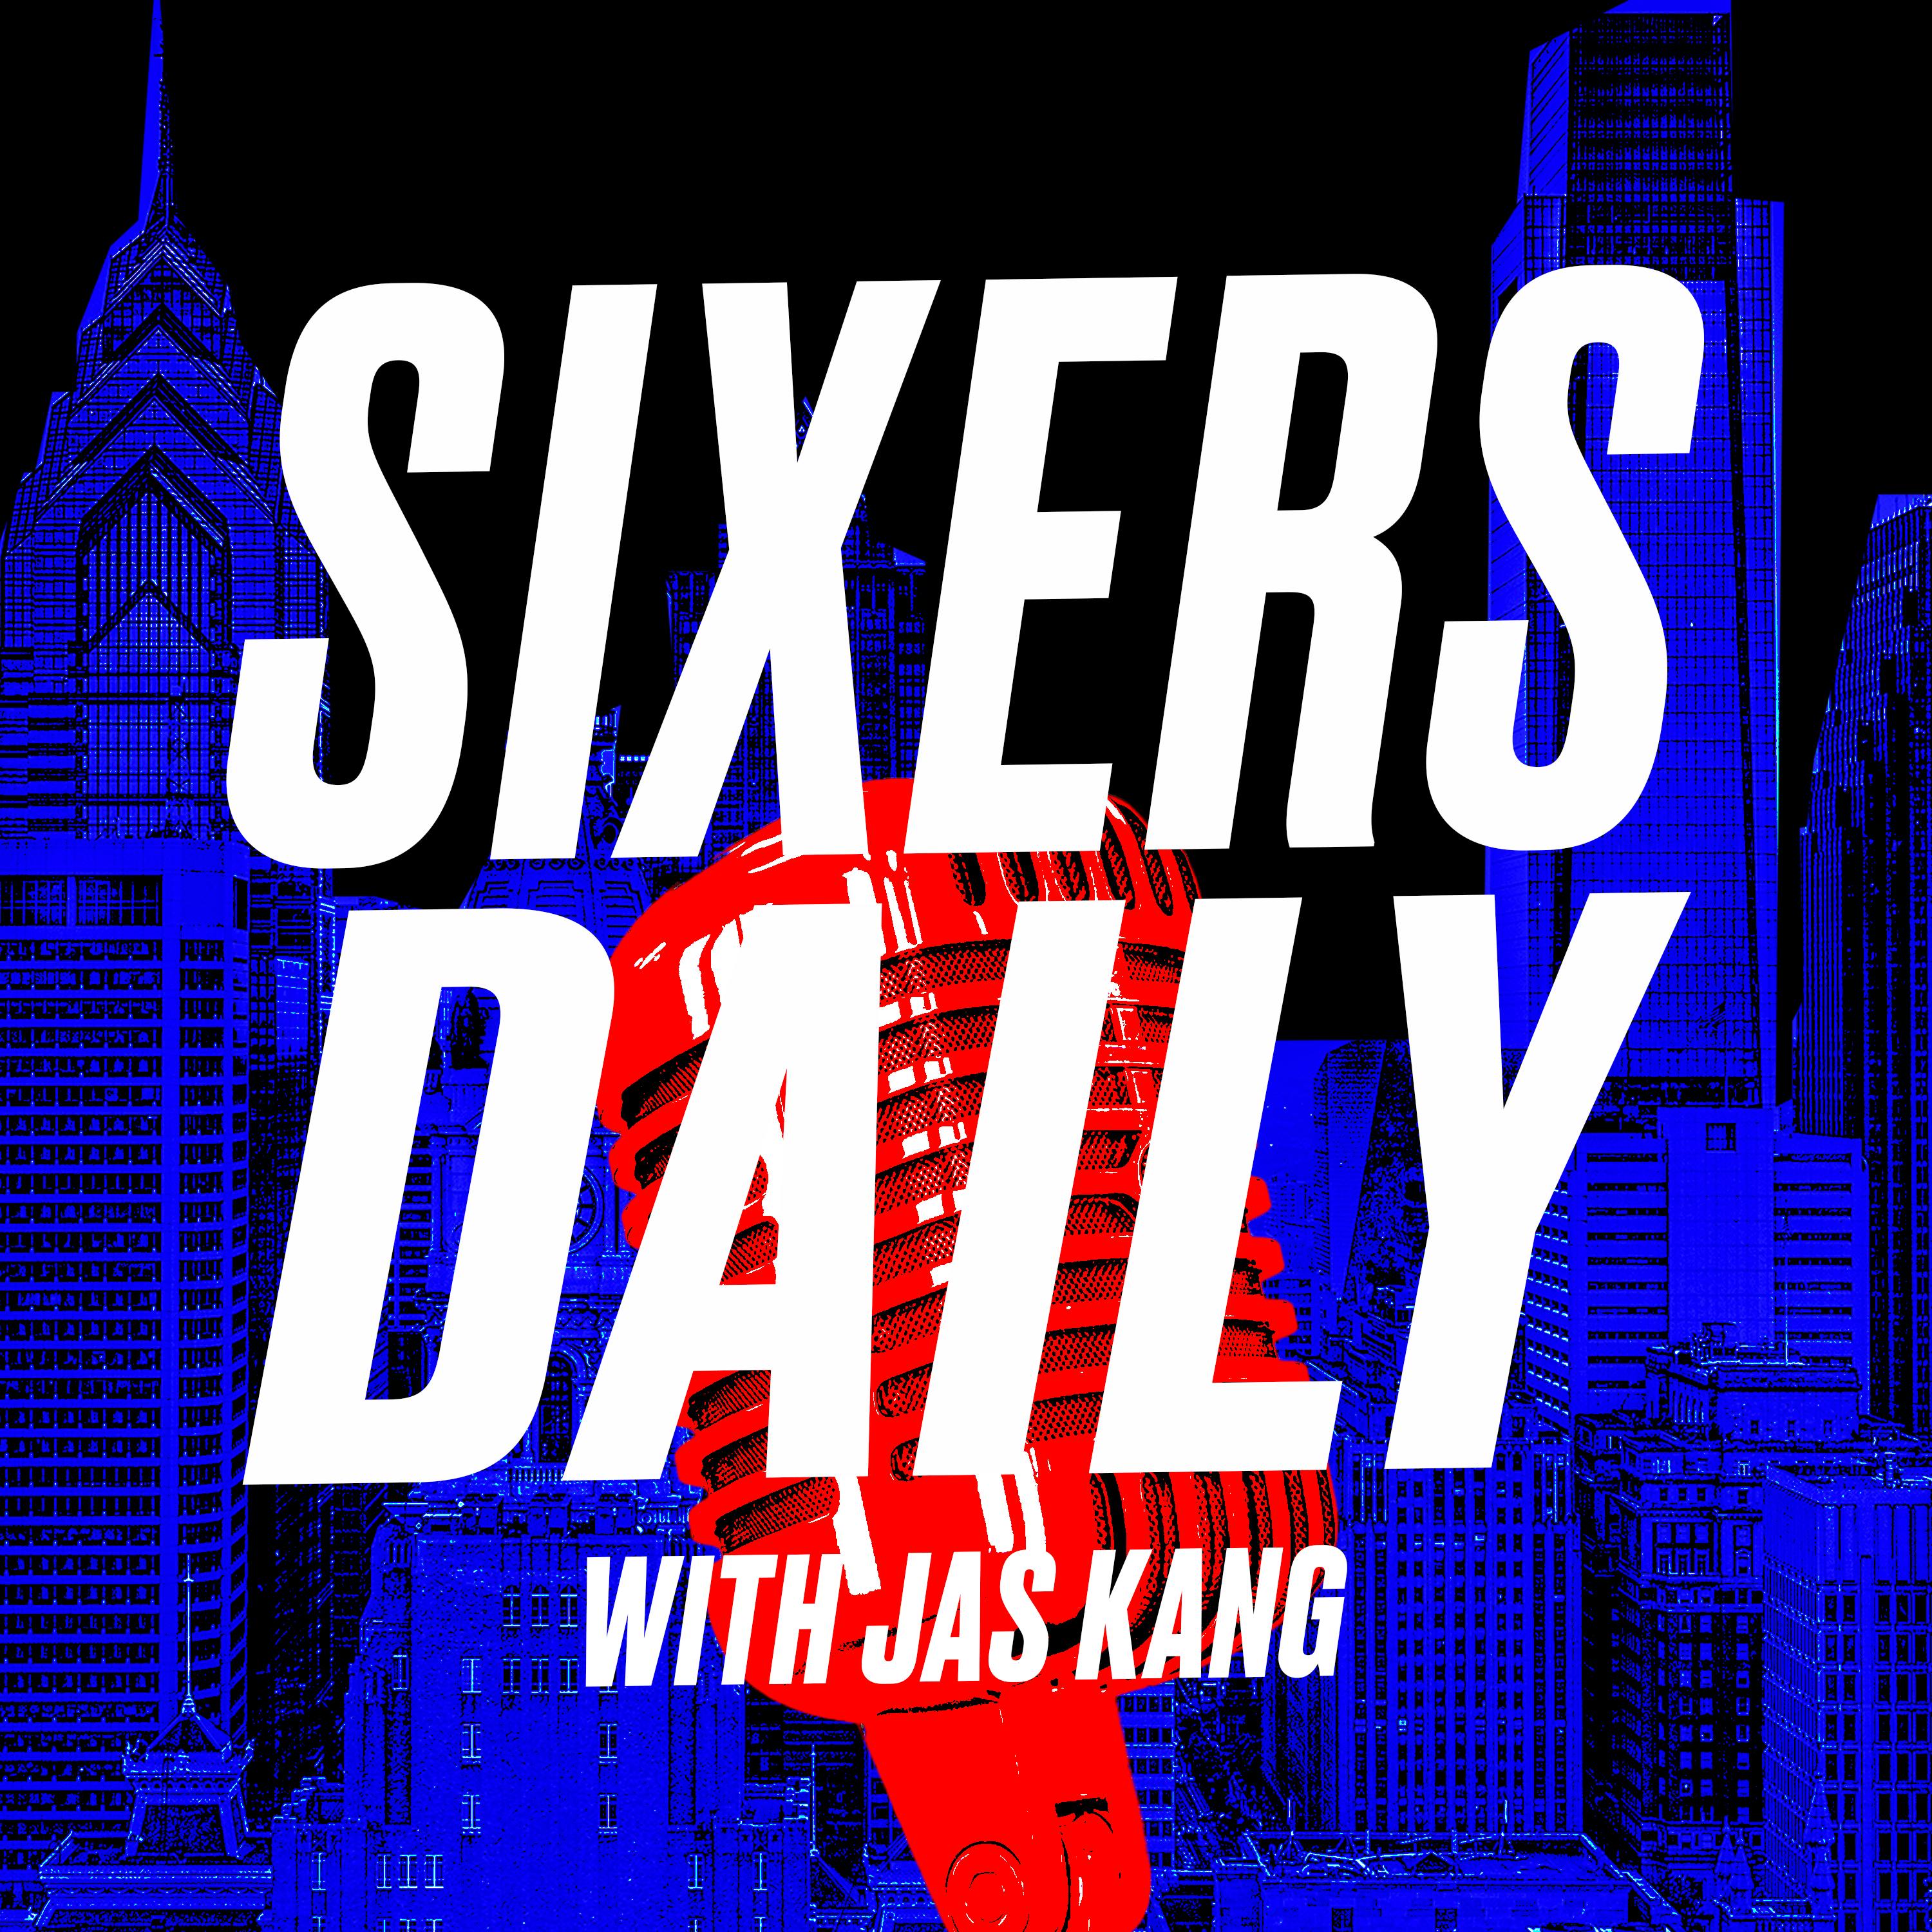 Sixers Daily with Jas Kang - Philly acquires De'Anthony Melton from the Grizzlies, which teams stood out at the NBA Draft, plus the Kyrie Irving drama continues. With Dave Early and Jackson Frank